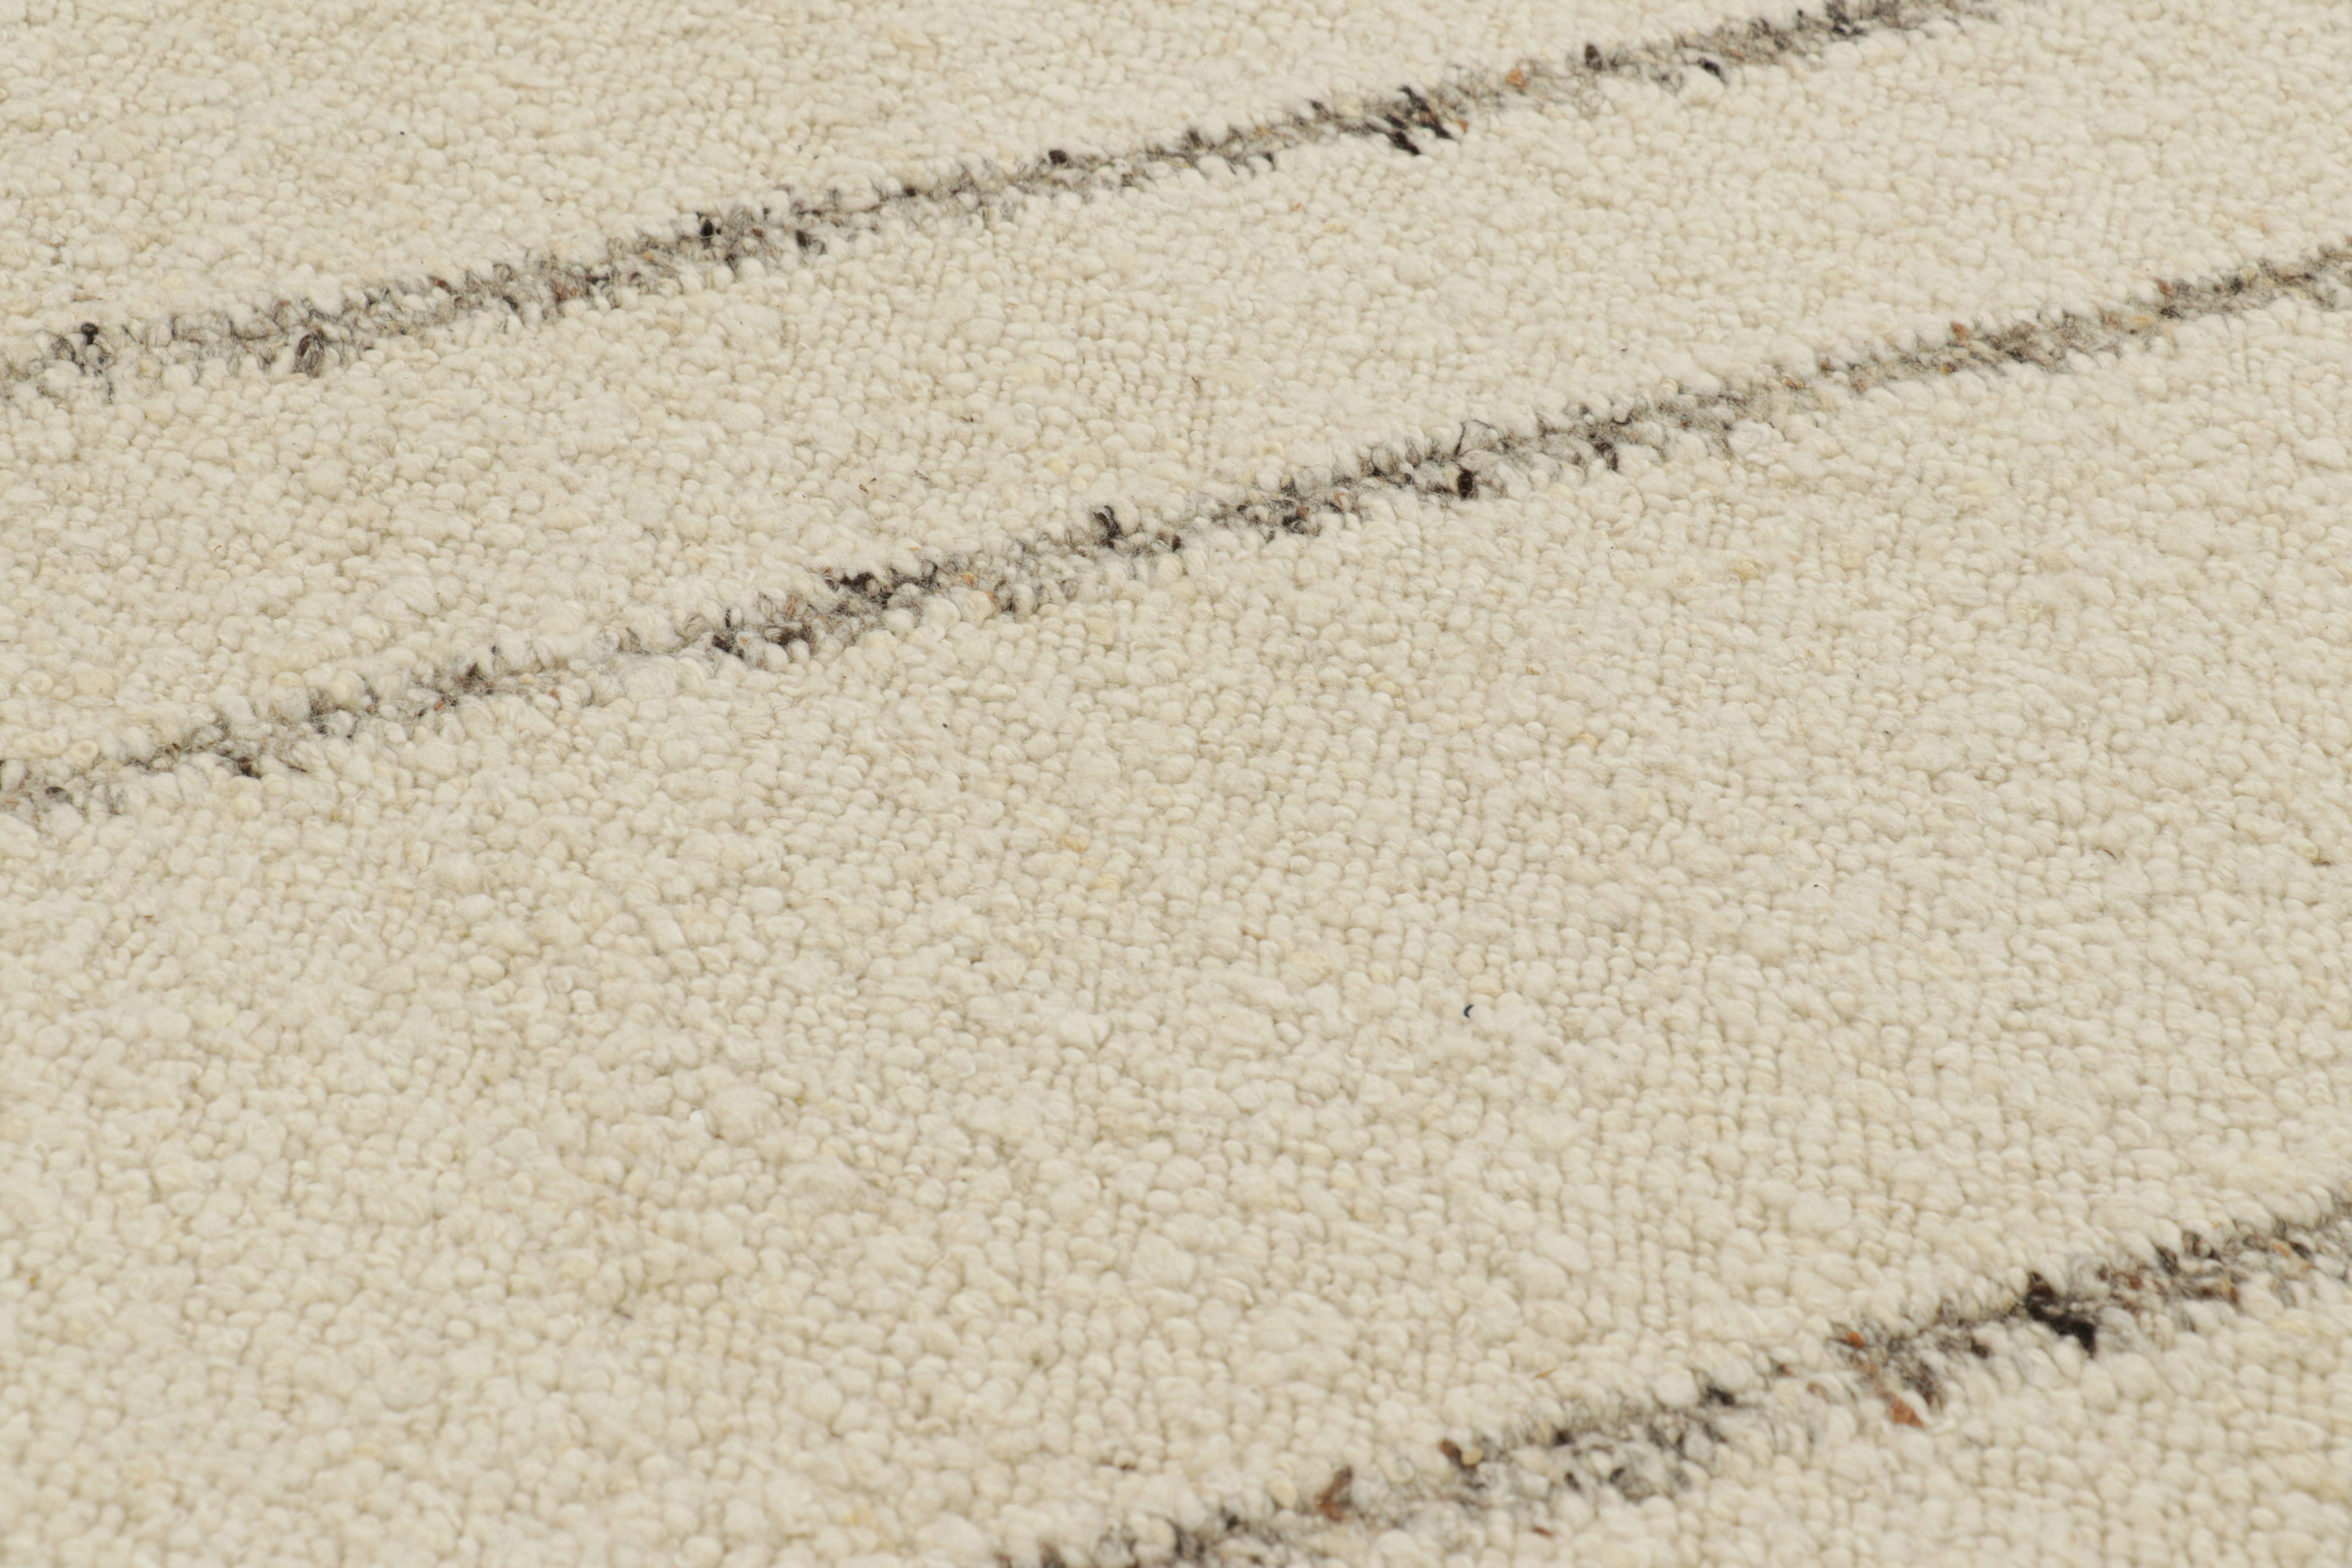 Handwoven in wool, this 9x12 Kilim is a smart contemporary and textural piece from Rug & Kilim, with subtle variations in color and a boucle-like texture which lend a fabulous sense of dimension to the simple stripes atop its creamy white field.